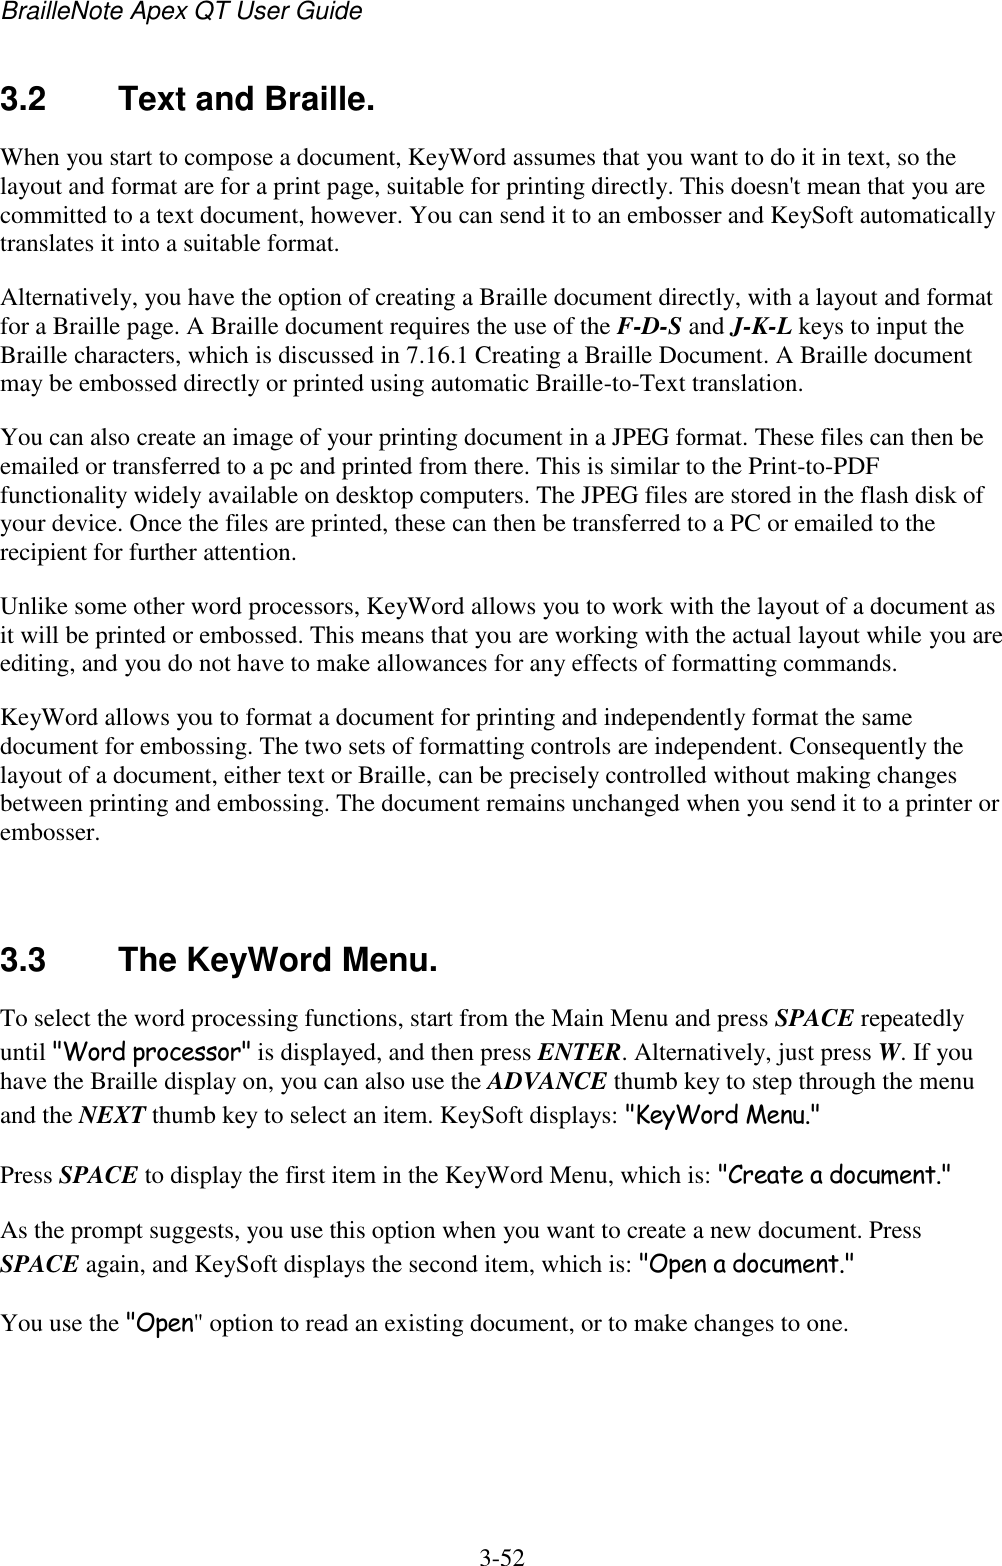 BrailleNote Apex QT User Guide  3-52   3.2  Text and Braille. When you start to compose a document, KeyWord assumes that you want to do it in text, so the layout and format are for a print page, suitable for printing directly. This doesn&apos;t mean that you are committed to a text document, however. You can send it to an embosser and KeySoft automatically translates it into a suitable format. Alternatively, you have the option of creating a Braille document directly, with a layout and format for a Braille page. A Braille document requires the use of the F-D-S and J-K-L keys to input the Braille characters, which is discussed in 7.16.1 Creating a Braille Document. A Braille document may be embossed directly or printed using automatic Braille-to-Text translation. You can also create an image of your printing document in a JPEG format. These files can then be emailed or transferred to a pc and printed from there. This is similar to the Print-to-PDF functionality widely available on desktop computers. The JPEG files are stored in the flash disk of your device. Once the files are printed, these can then be transferred to a PC or emailed to the recipient for further attention. Unlike some other word processors, KeyWord allows you to work with the layout of a document as it will be printed or embossed. This means that you are working with the actual layout while you are editing, and you do not have to make allowances for any effects of formatting commands. KeyWord allows you to format a document for printing and independently format the same document for embossing. The two sets of formatting controls are independent. Consequently the layout of a document, either text or Braille, can be precisely controlled without making changes between printing and embossing. The document remains unchanged when you send it to a printer or embosser.   3.3  The KeyWord Menu. To select the word processing functions, start from the Main Menu and press SPACE repeatedly until &quot;Word processor&quot; is displayed, and then press ENTER. Alternatively, just press W. If you have the Braille display on, you can also use the ADVANCE thumb key to step through the menu and the NEXT thumb key to select an item. KeySoft displays: &quot;KeyWord Menu.&quot; Press SPACE to display the first item in the KeyWord Menu, which is: &quot;Create a document.&quot; As the prompt suggests, you use this option when you want to create a new document. Press SPACE again, and KeySoft displays the second item, which is: &quot;Open a document.&quot; You use the &quot;Open&quot; option to read an existing document, or to make changes to one.   